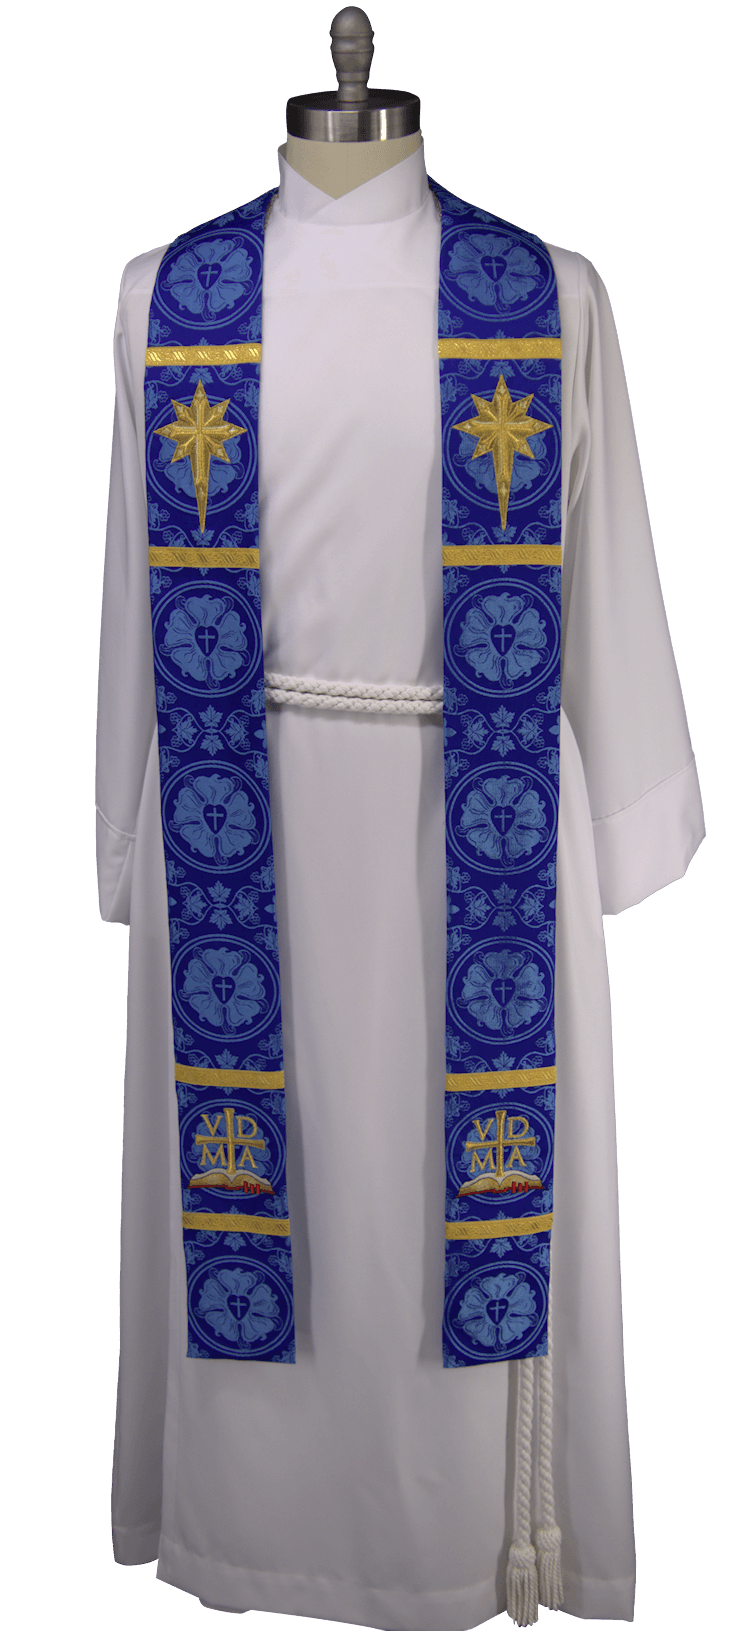 files/advent-star-stole-or-blue-or-violet-advent-pastor-priest-stole-ecclesiastical-sewing-3-31790326186240.png